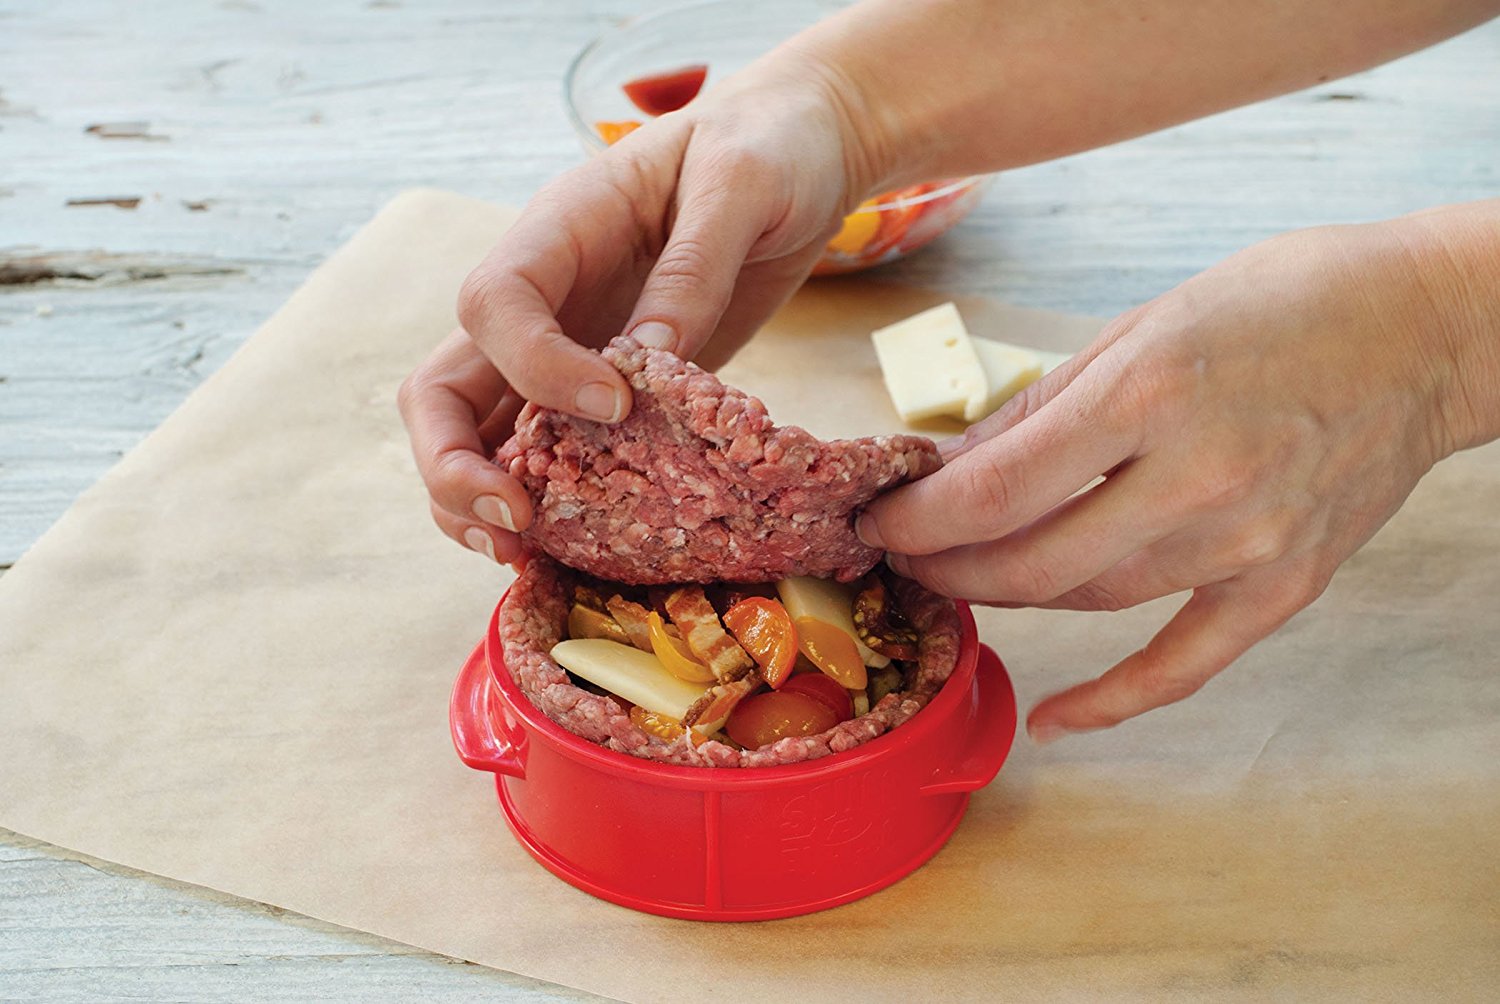 Forget those crappy frozen and store-bought burgers.  Now you can stuff whatever the f**k you want into your patties and create a true culinary masterpiece.  Get it <a href="https://amzn.to/2J3NUV6" target="_blank"><font color="red"><b>HERE</font></b></a>